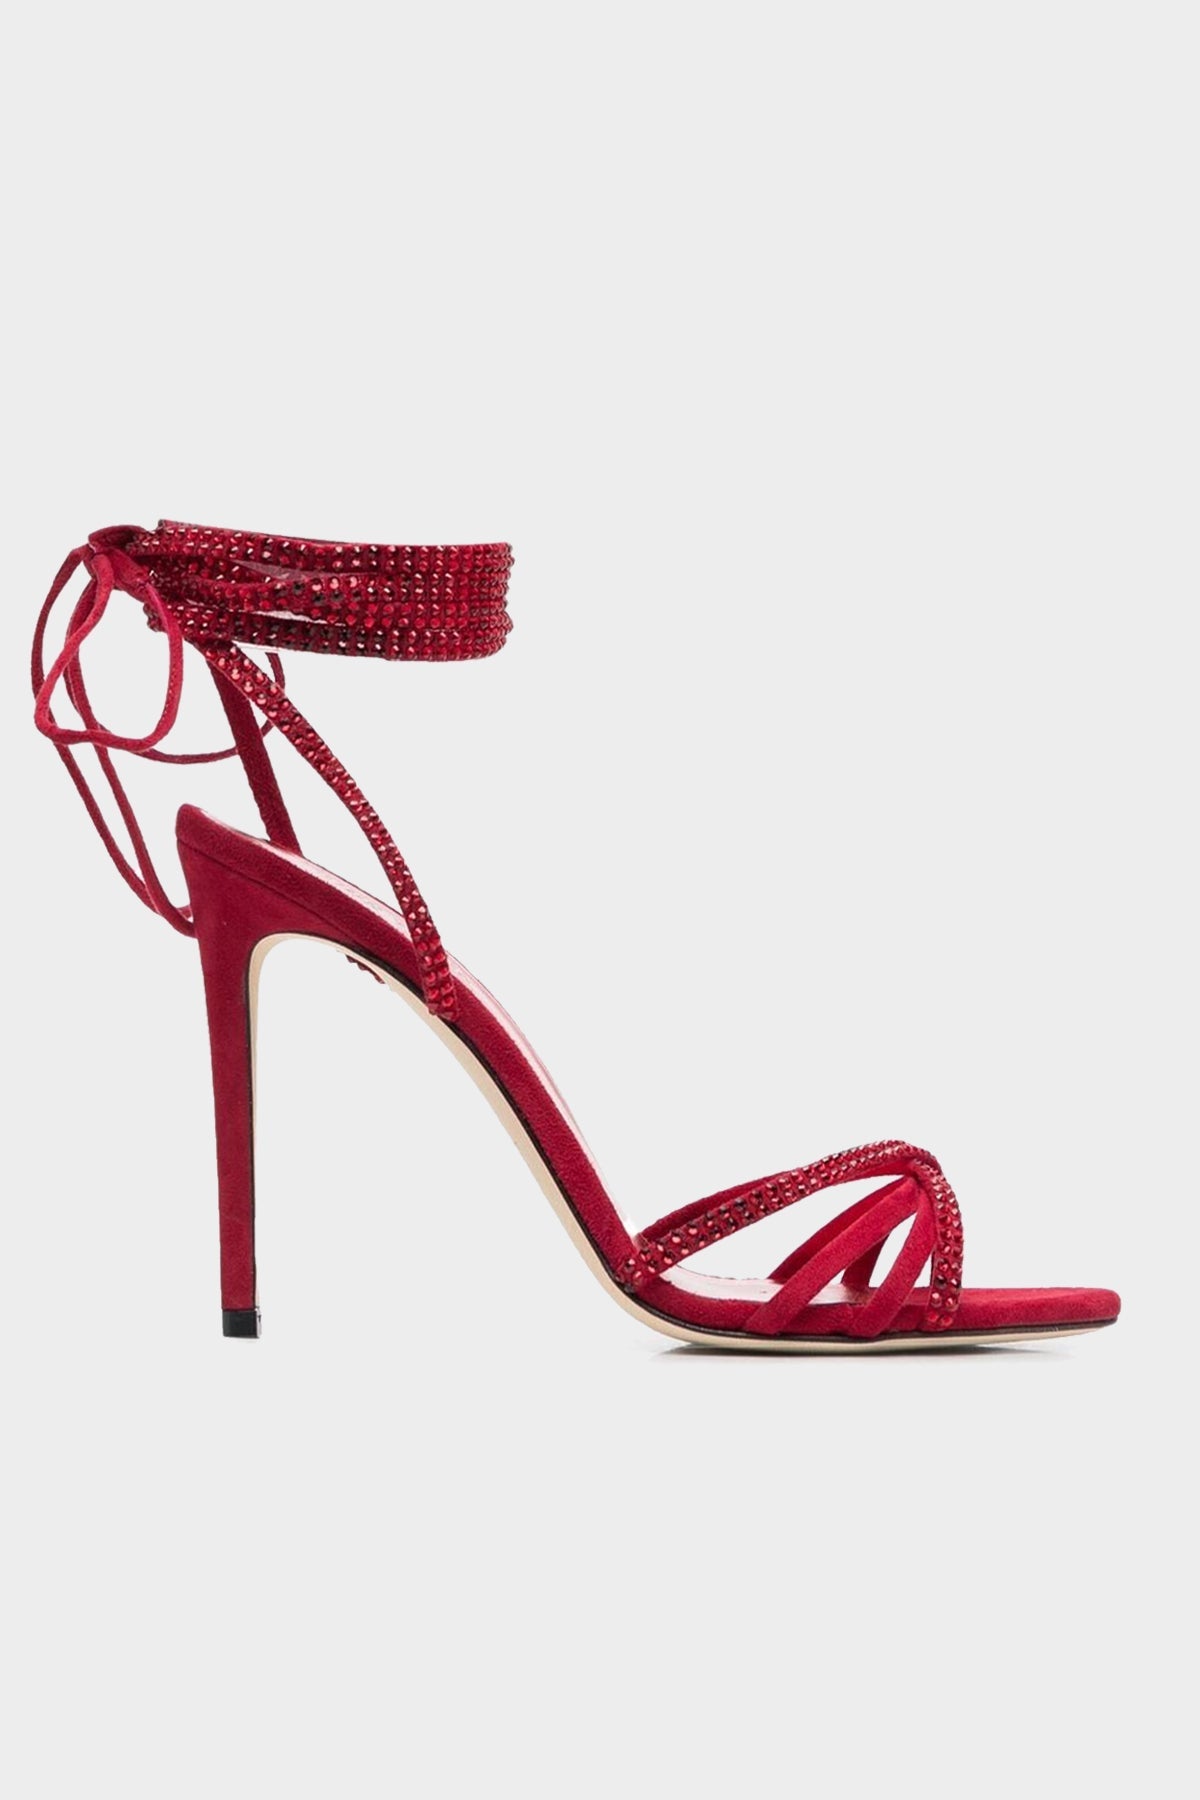 Holly Nicole Lace Up Sandal in Rugby - shop-olivia.com